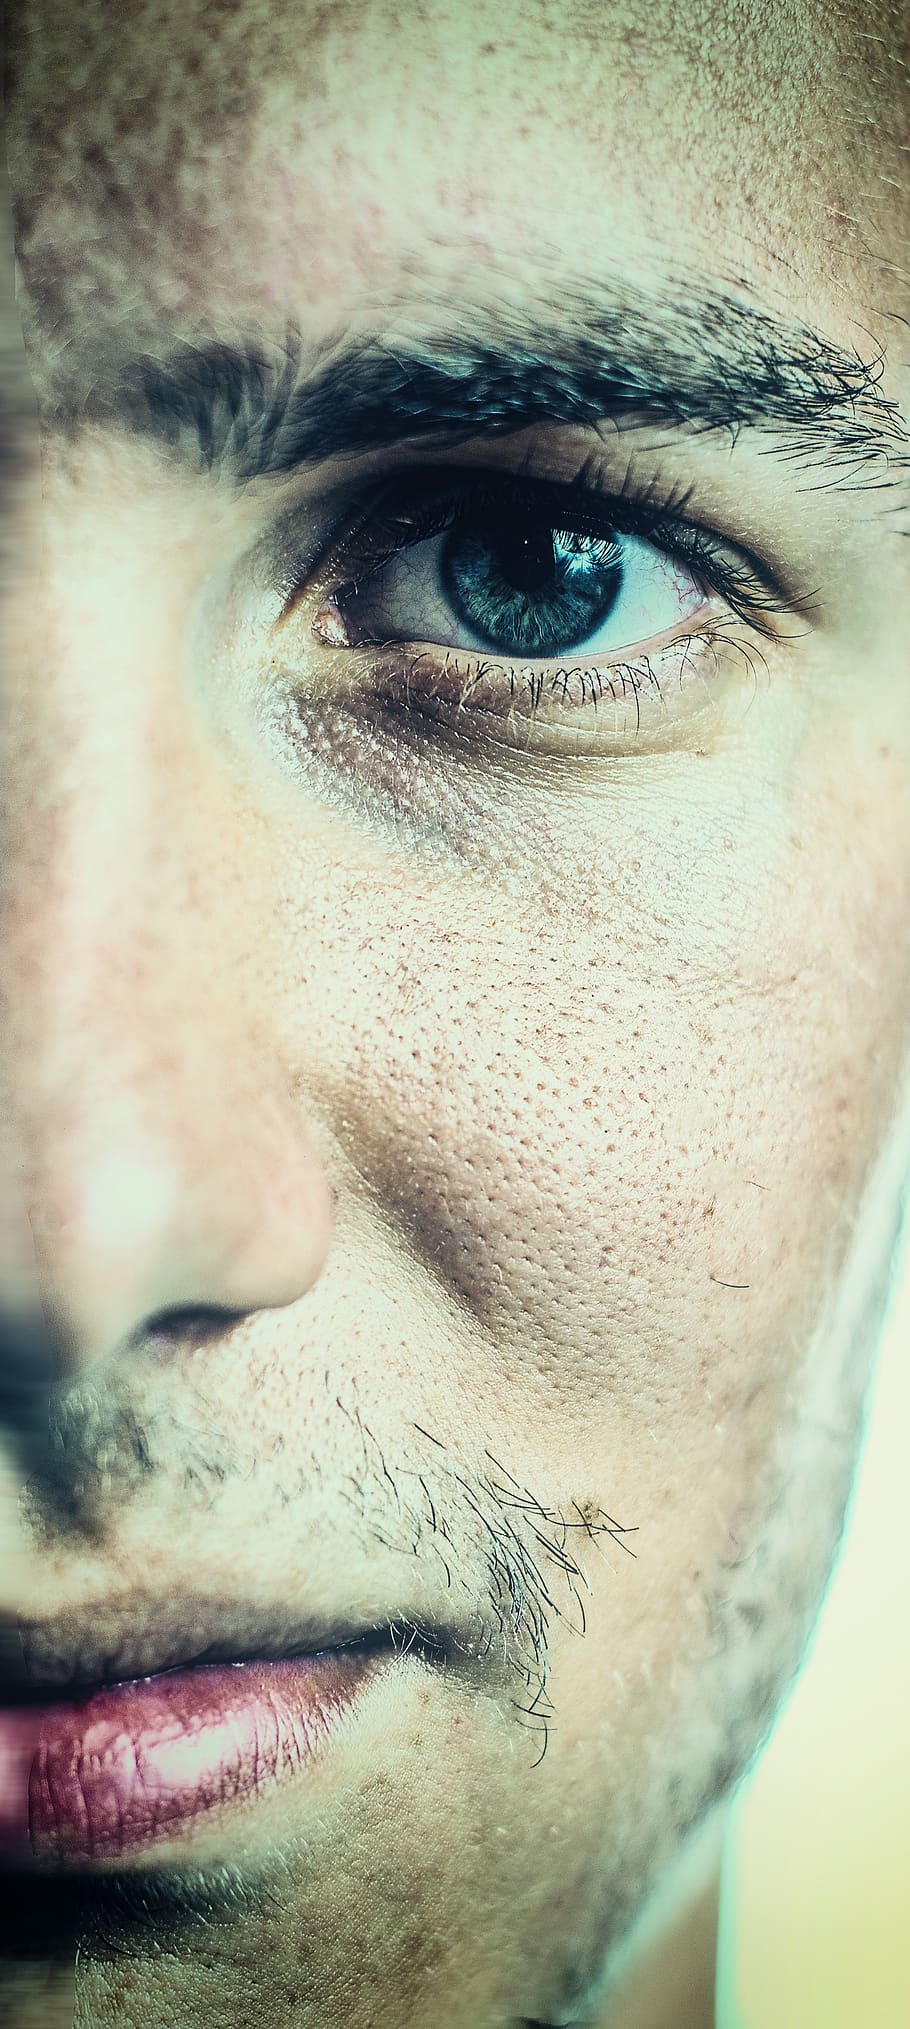 half face, portrait, young, head, person, man, one person, human body part, close-up, looking at camera